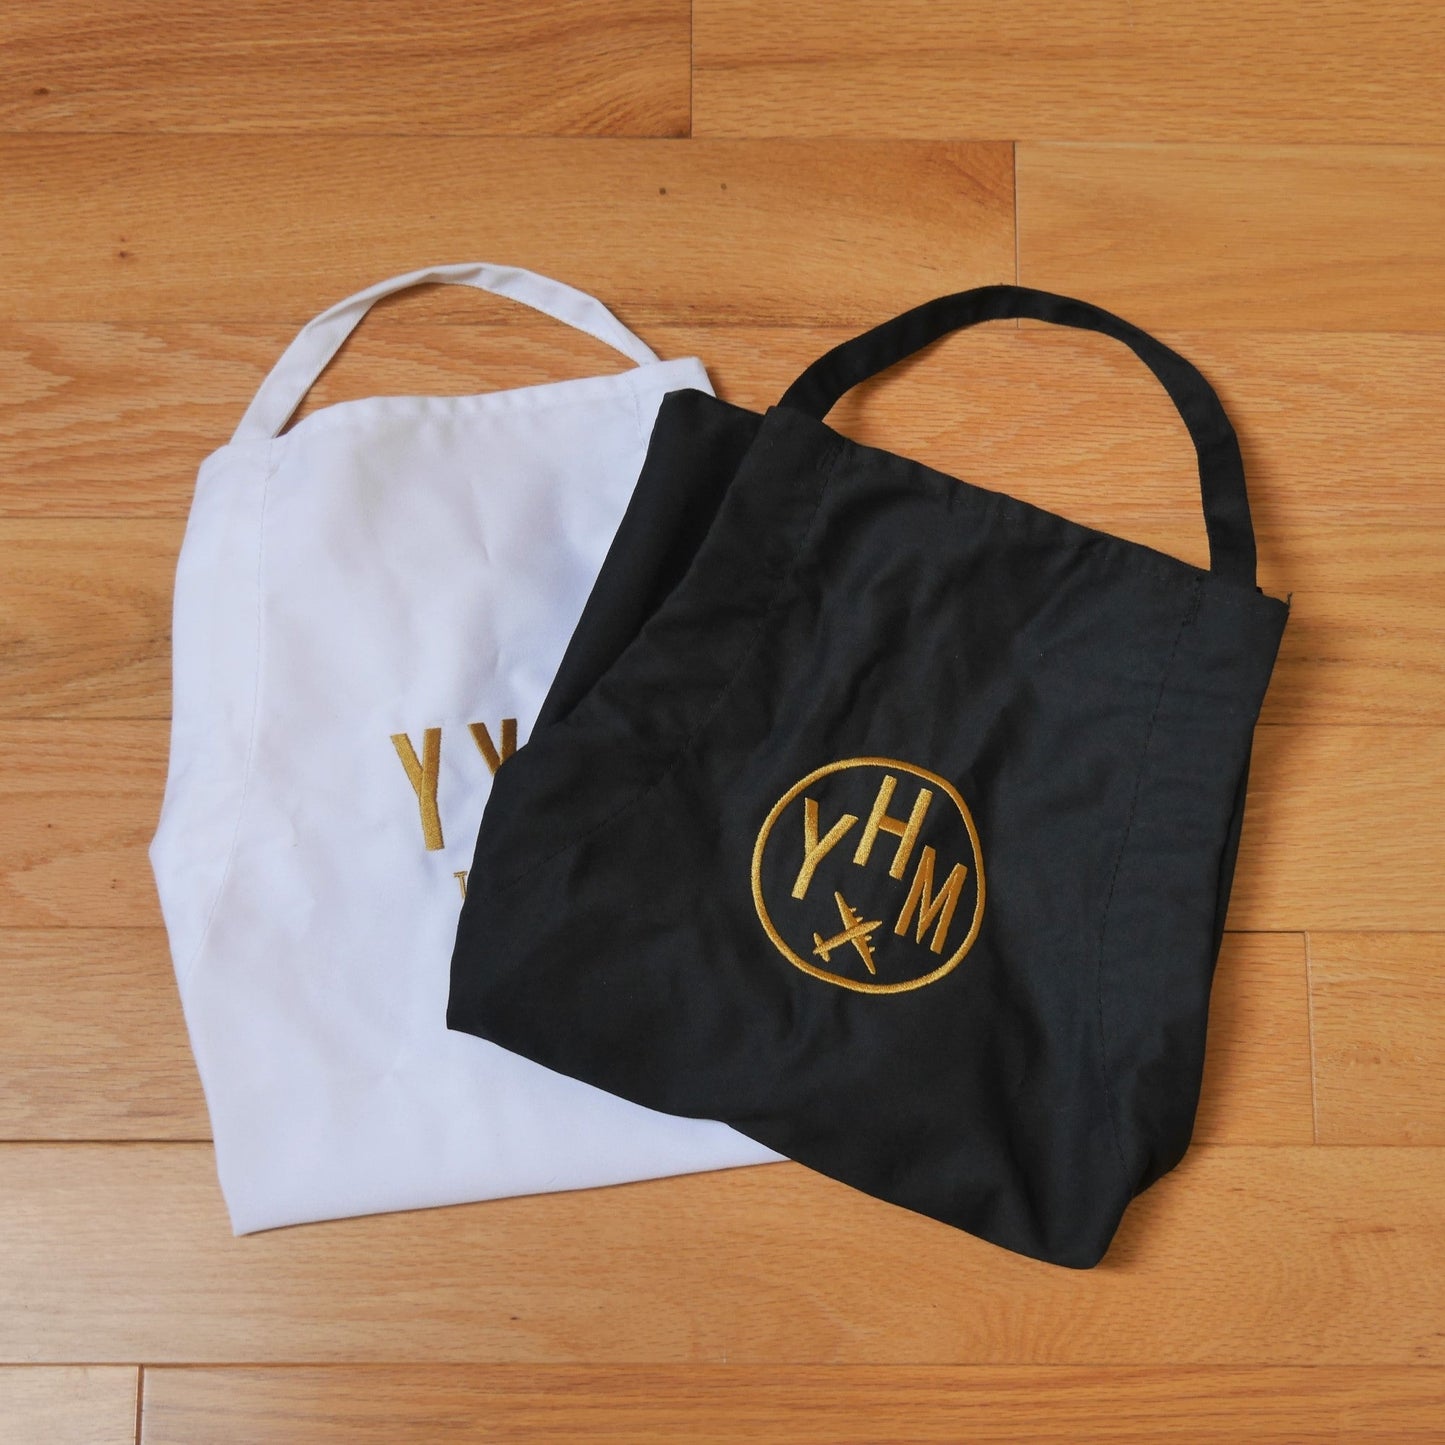 City Embroidered Apron - Old Gold • LOU Louisville • YHM Designs - Image 14